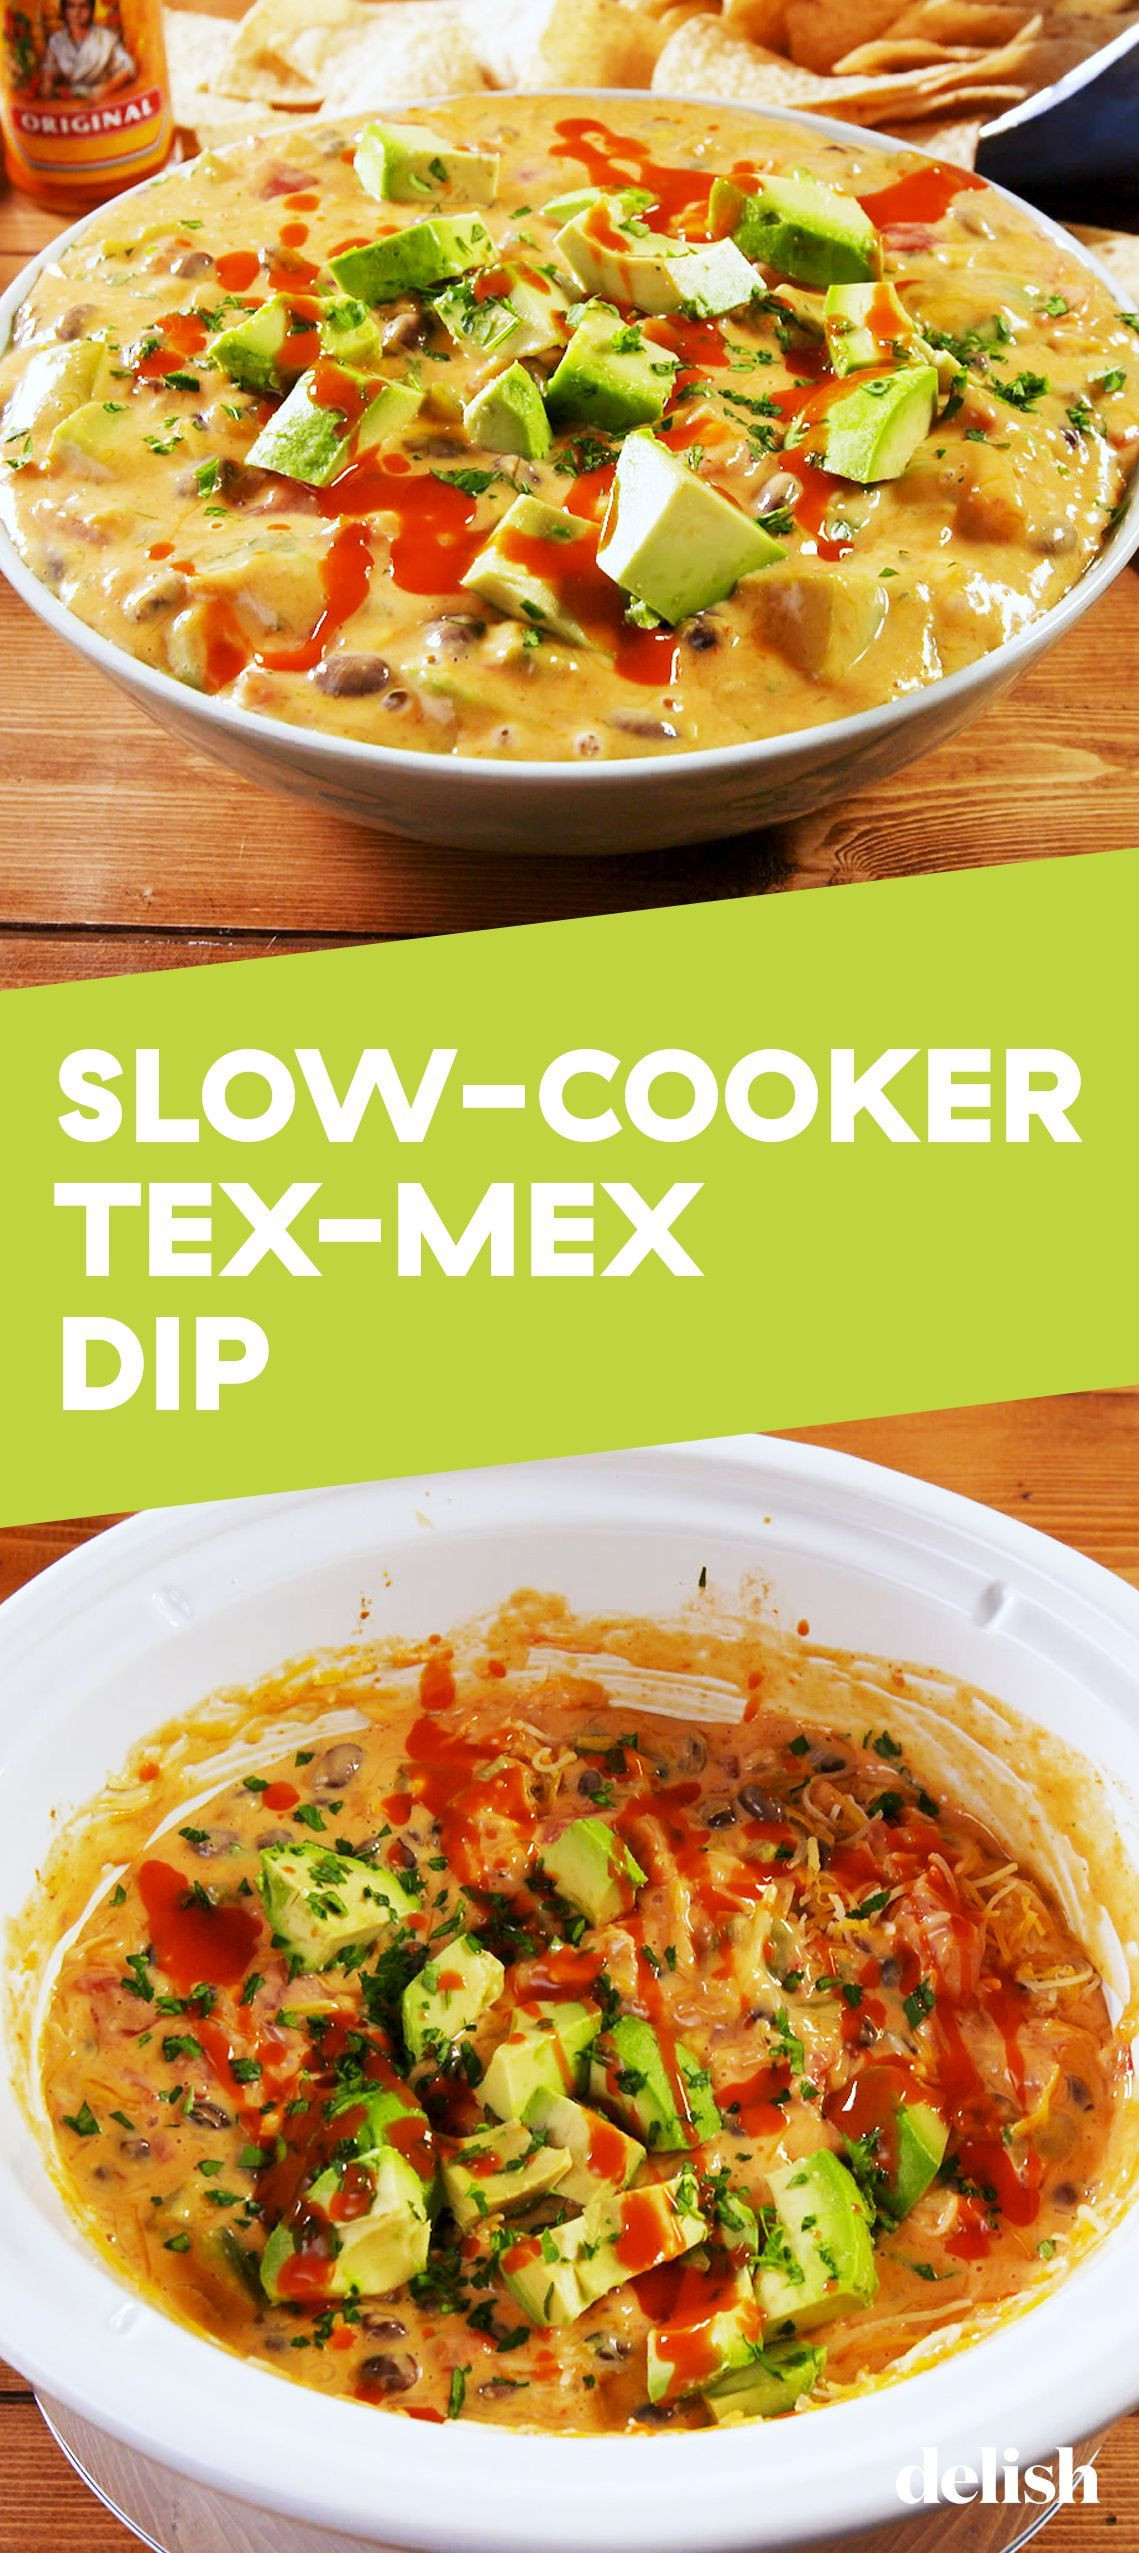 Slow Cooker Appetizer Recipes
 Slow Cooker Tex Mex Dip Recipe With images